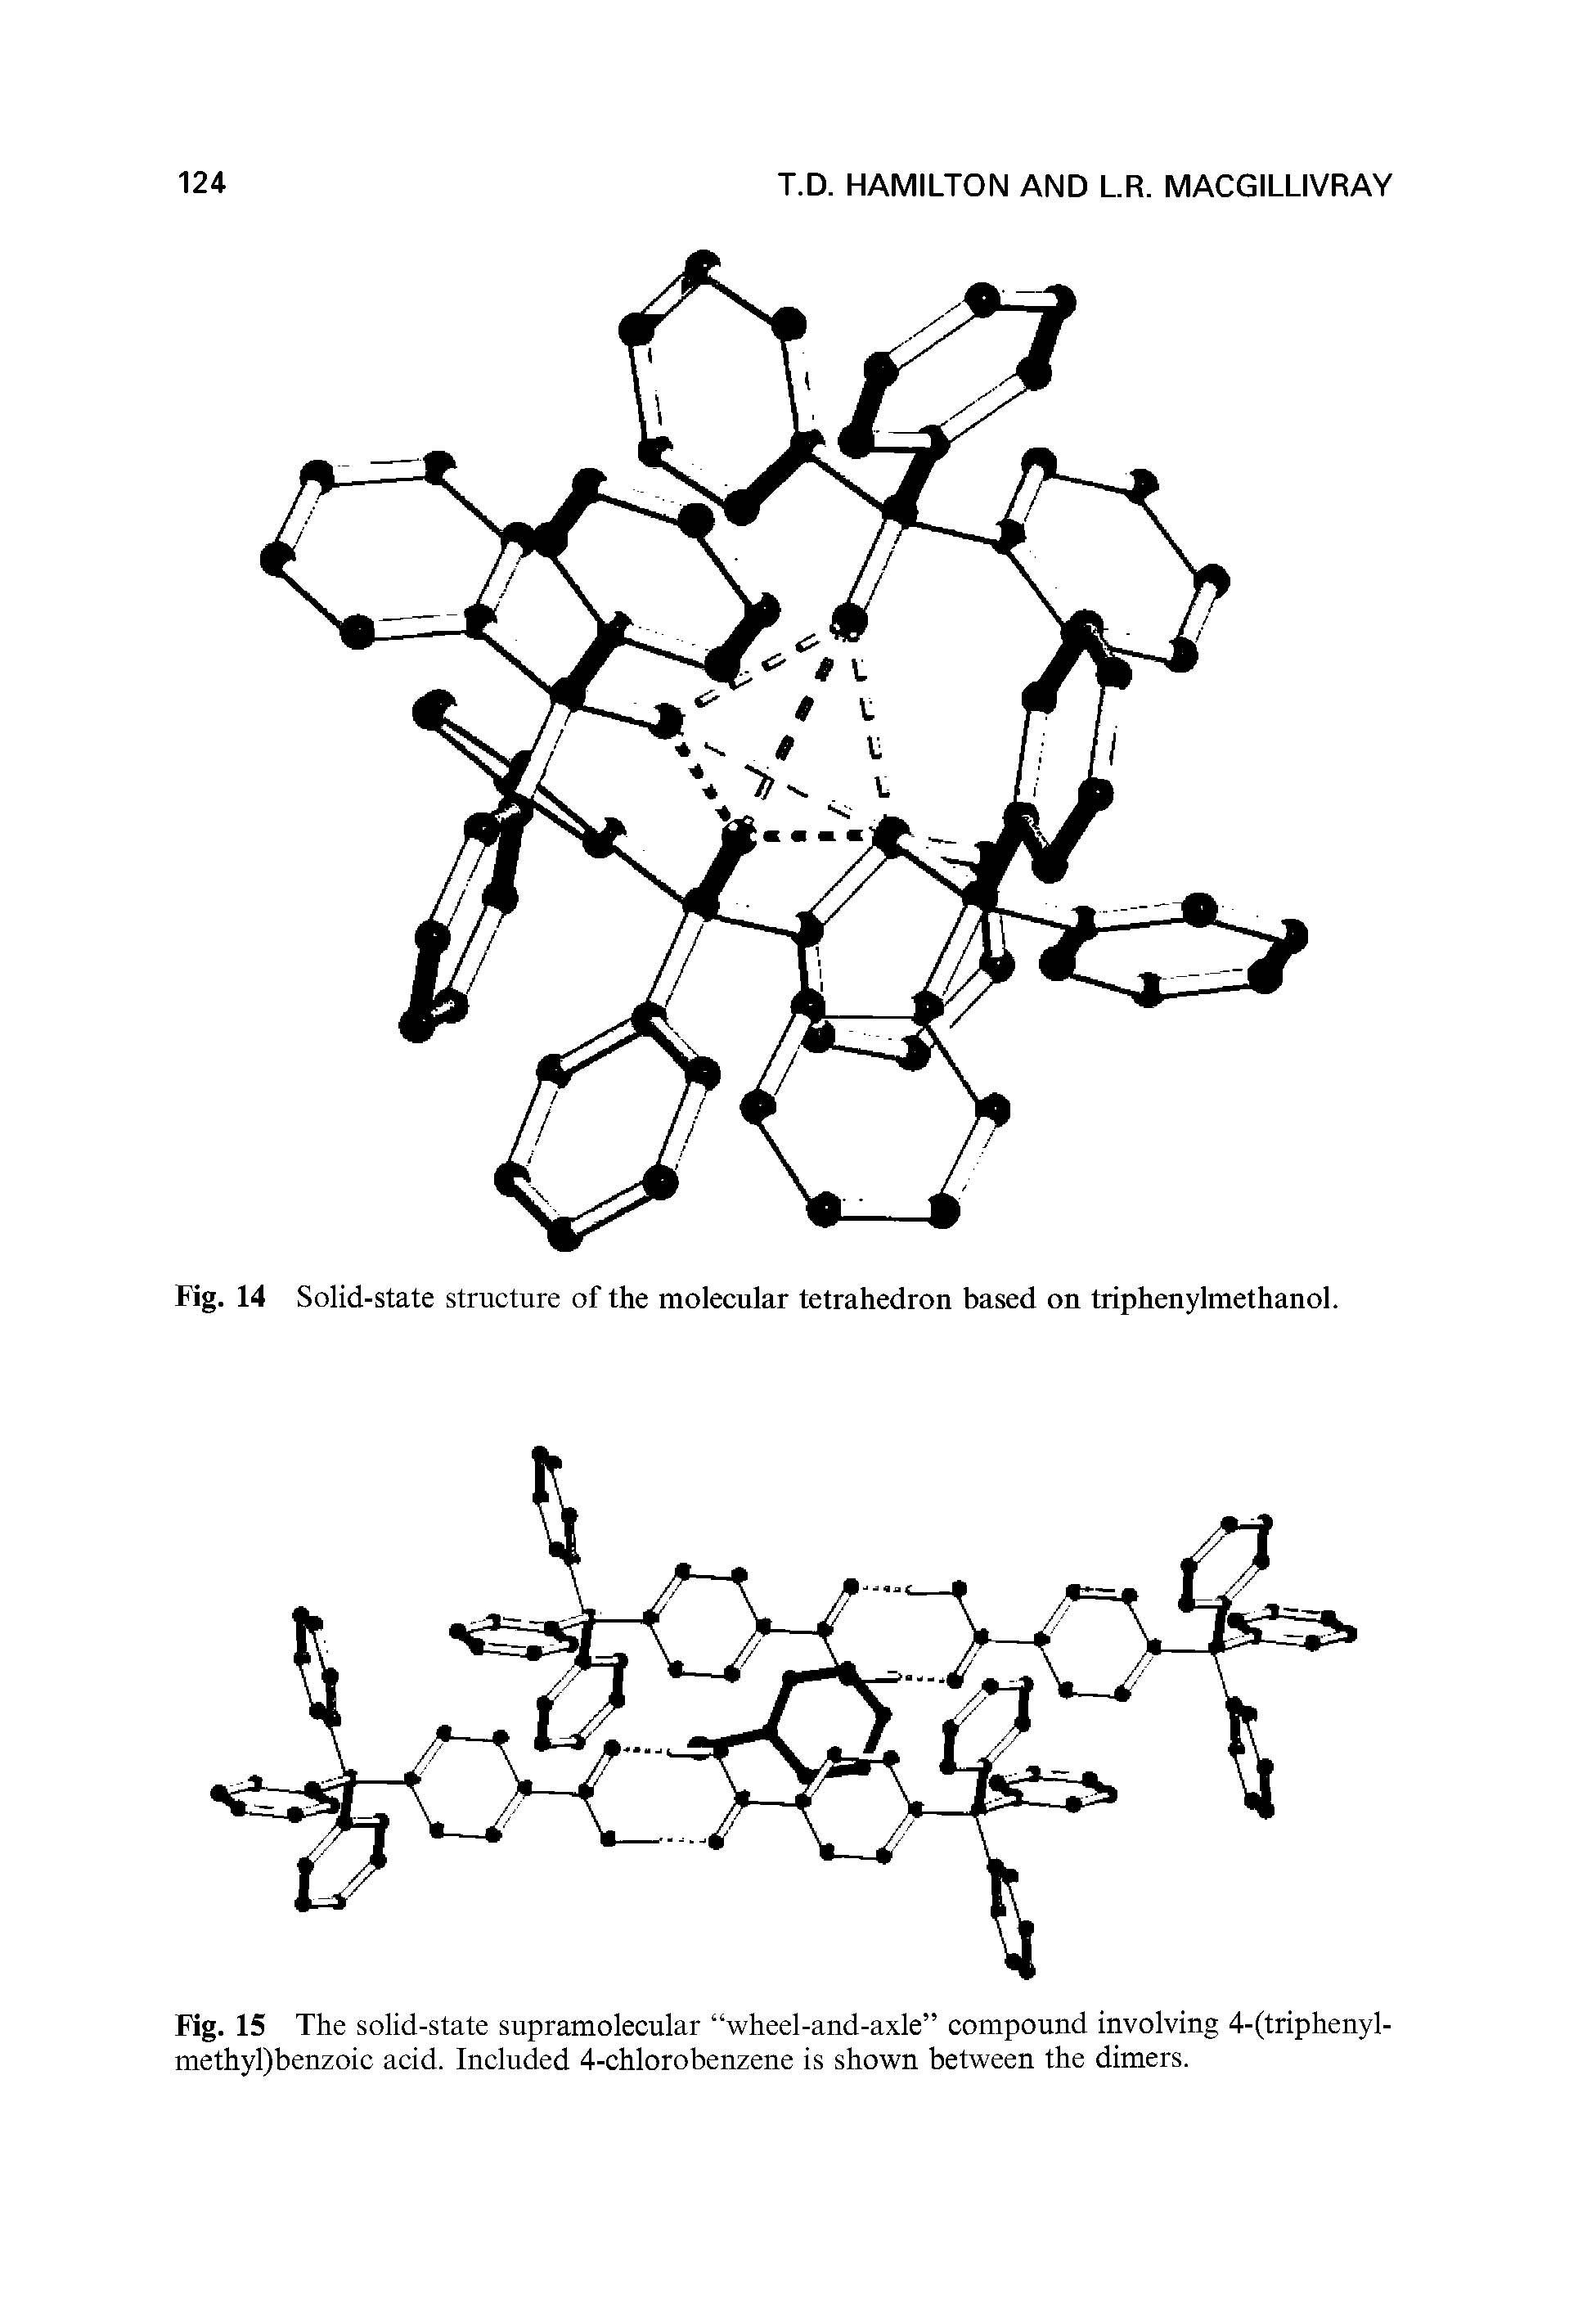 Fig. 14 Solid-state structure of the molecular tetrahedron based on triphenylmethanol.